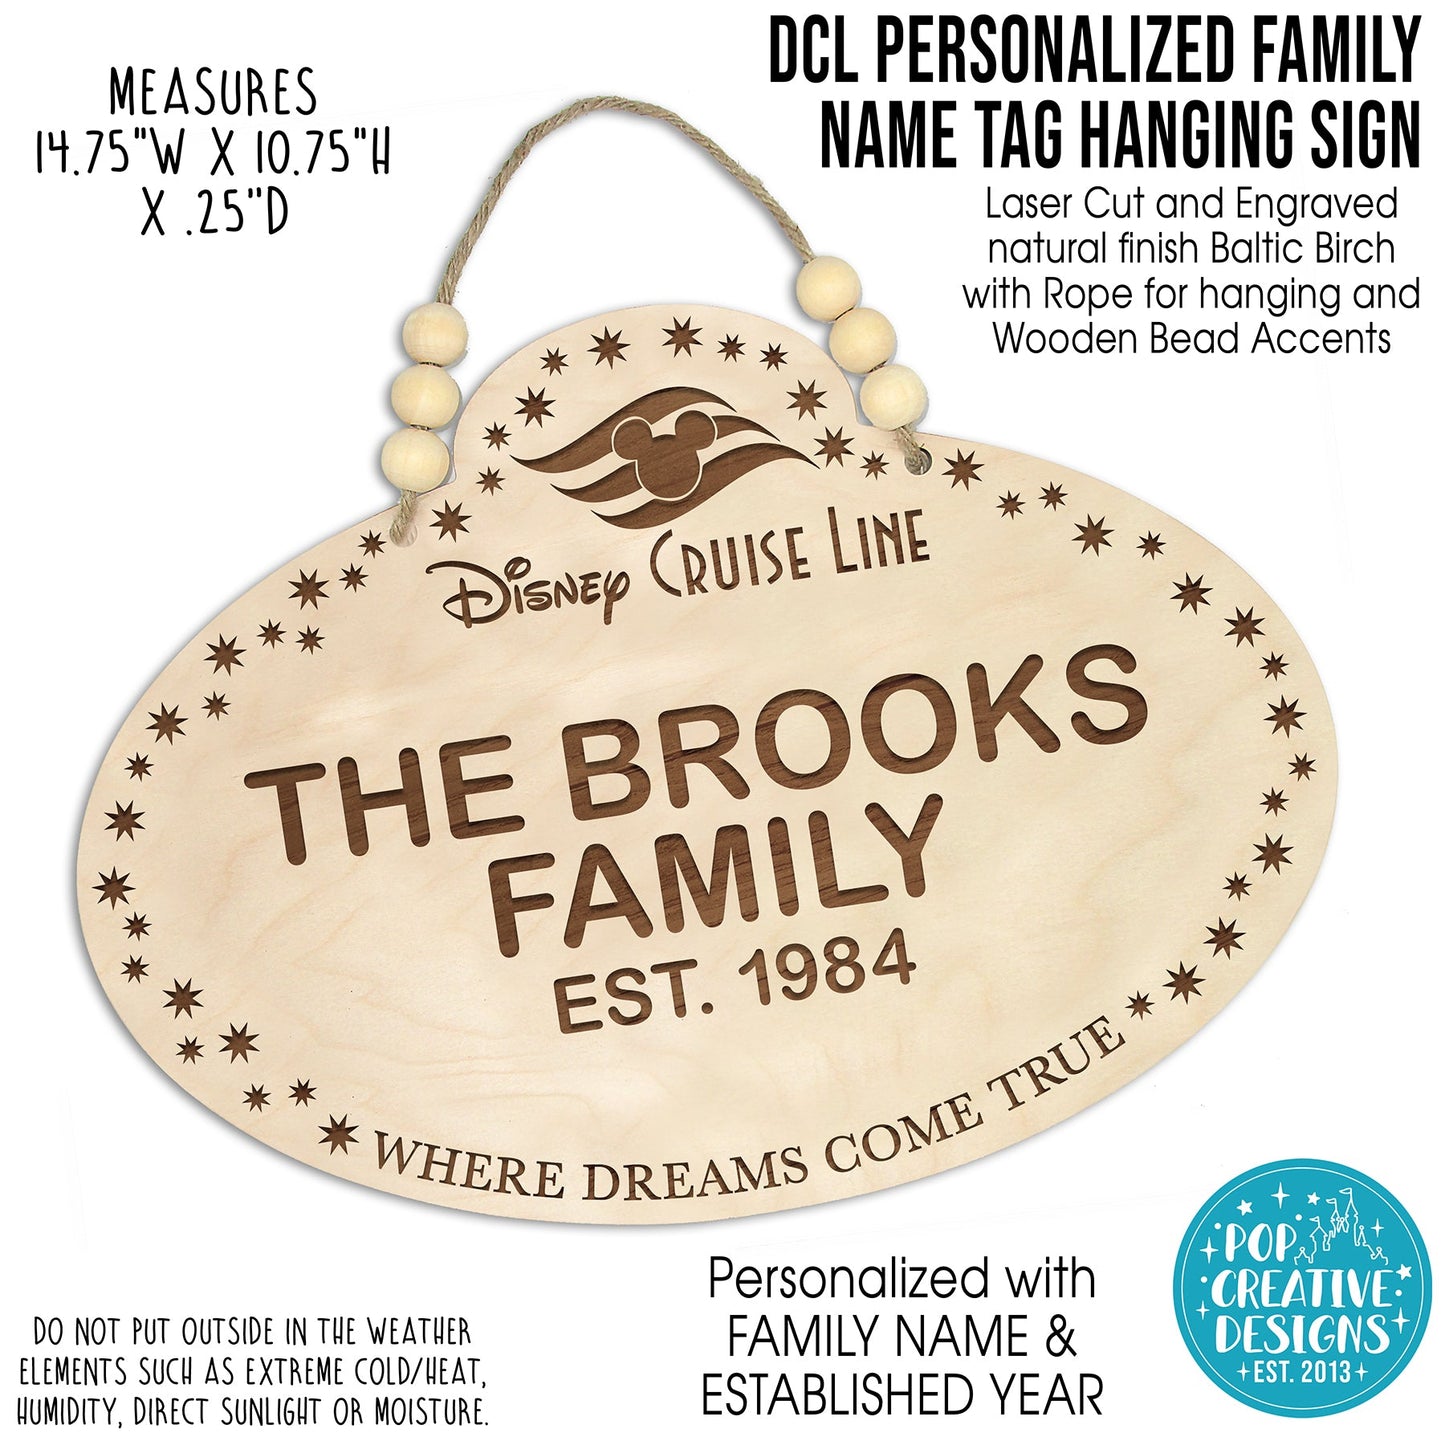 DCL Personalized Family Name Tag Hanging Sign - FREE SHIPPING